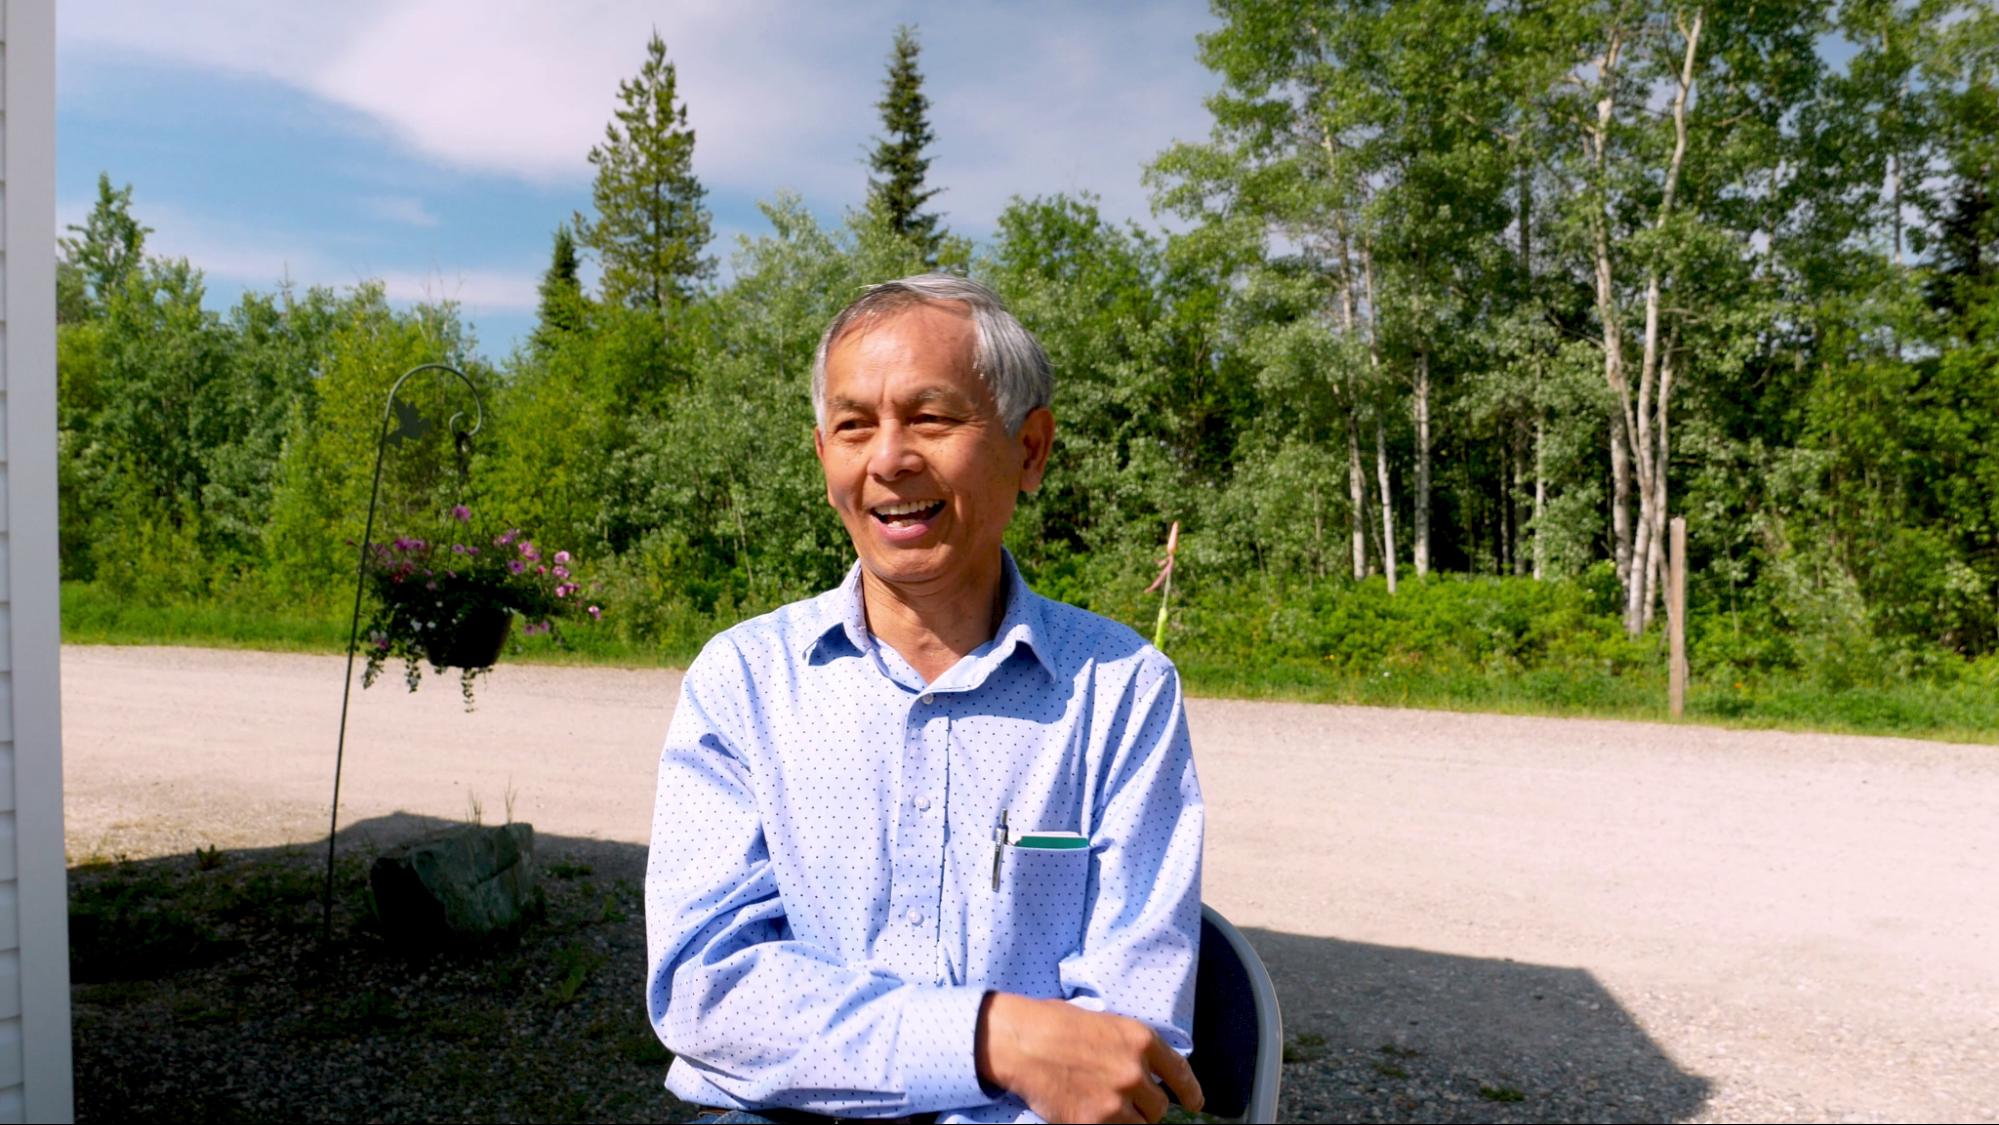 The owner of MamaYeh RV Park, Edward, in Prince George, BC, Canada